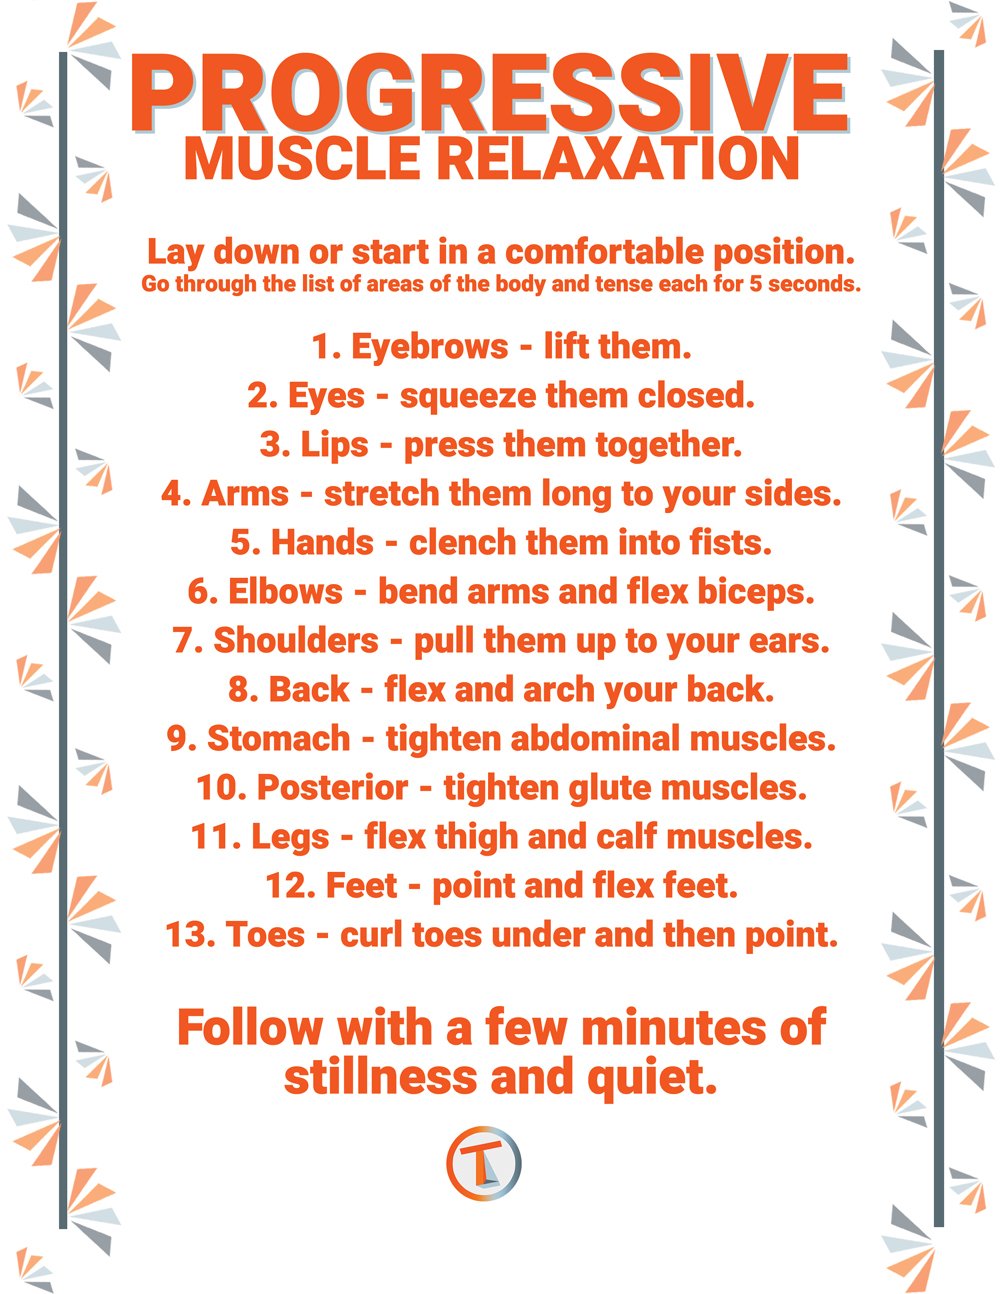 Progressive Muscle Relaxation: Tips for Stress and Sleep